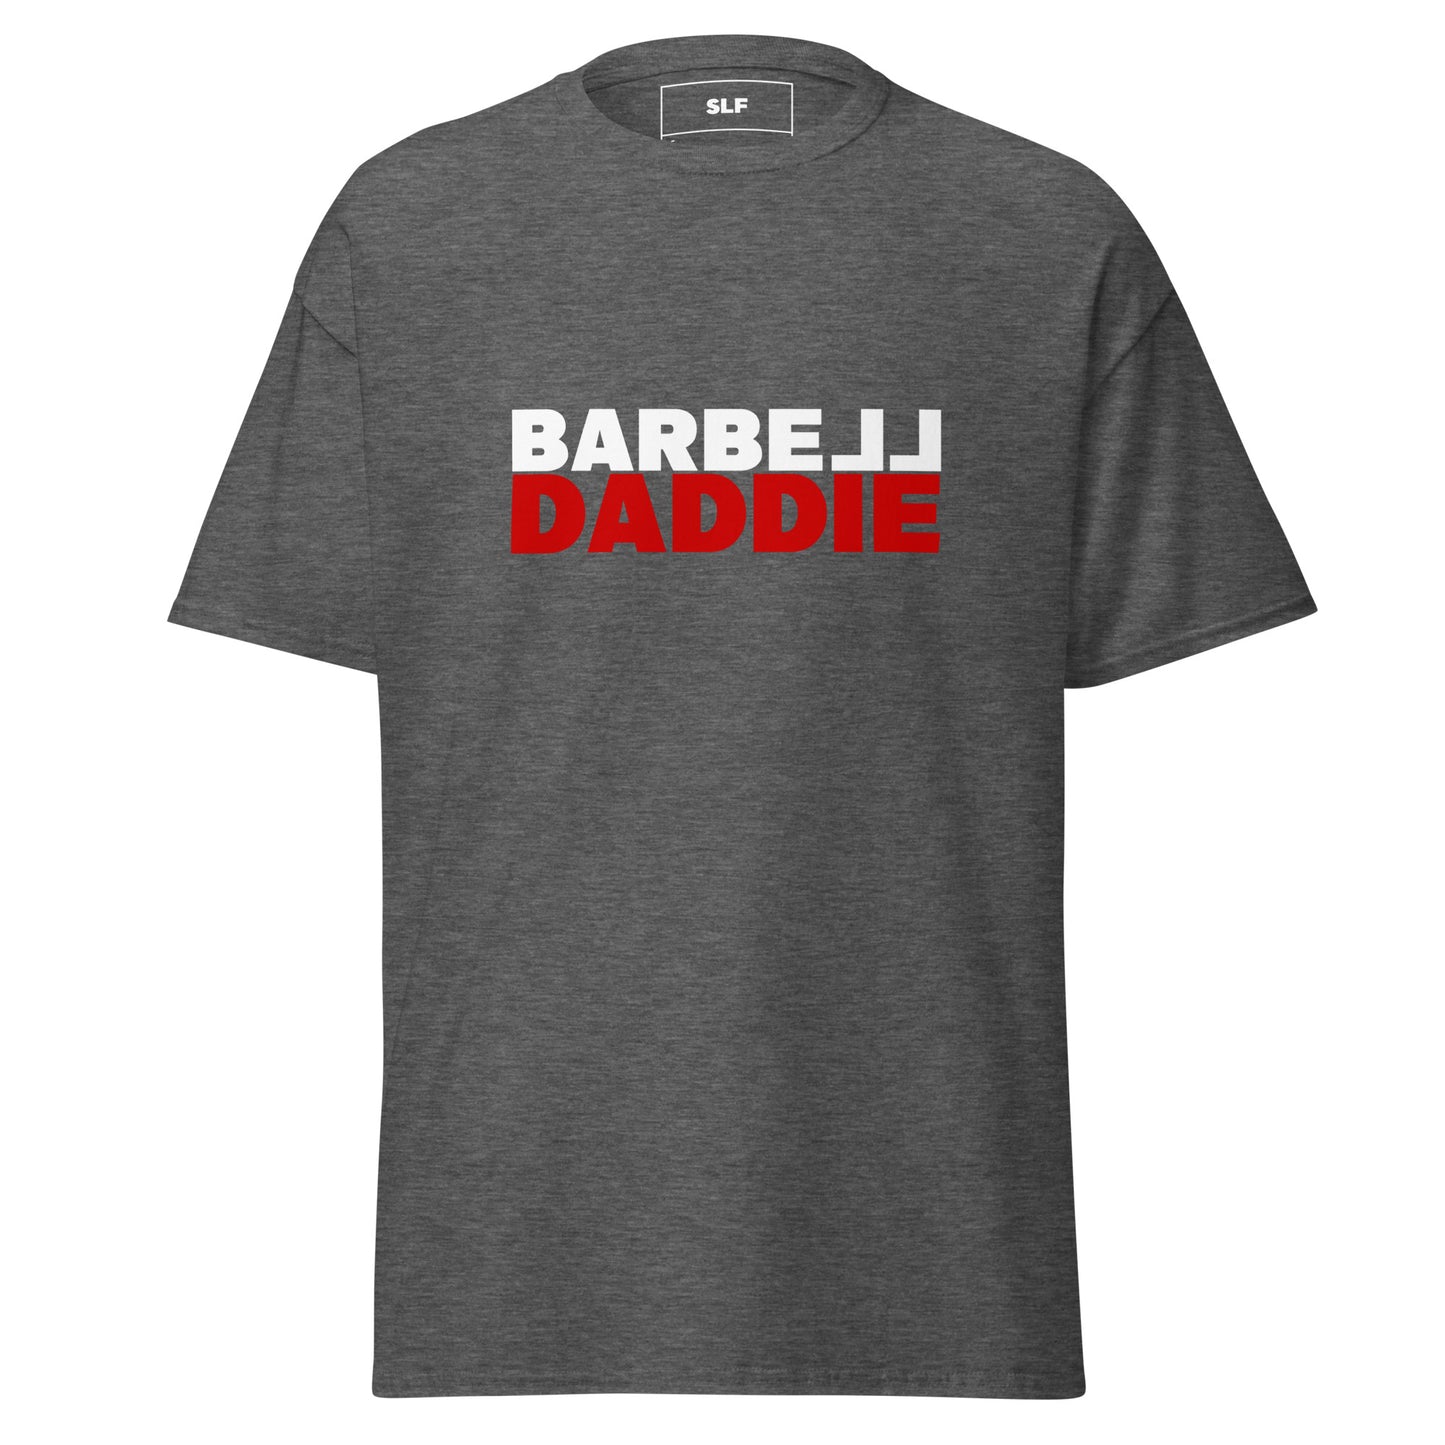 Barbell Daddie Men's classic tee